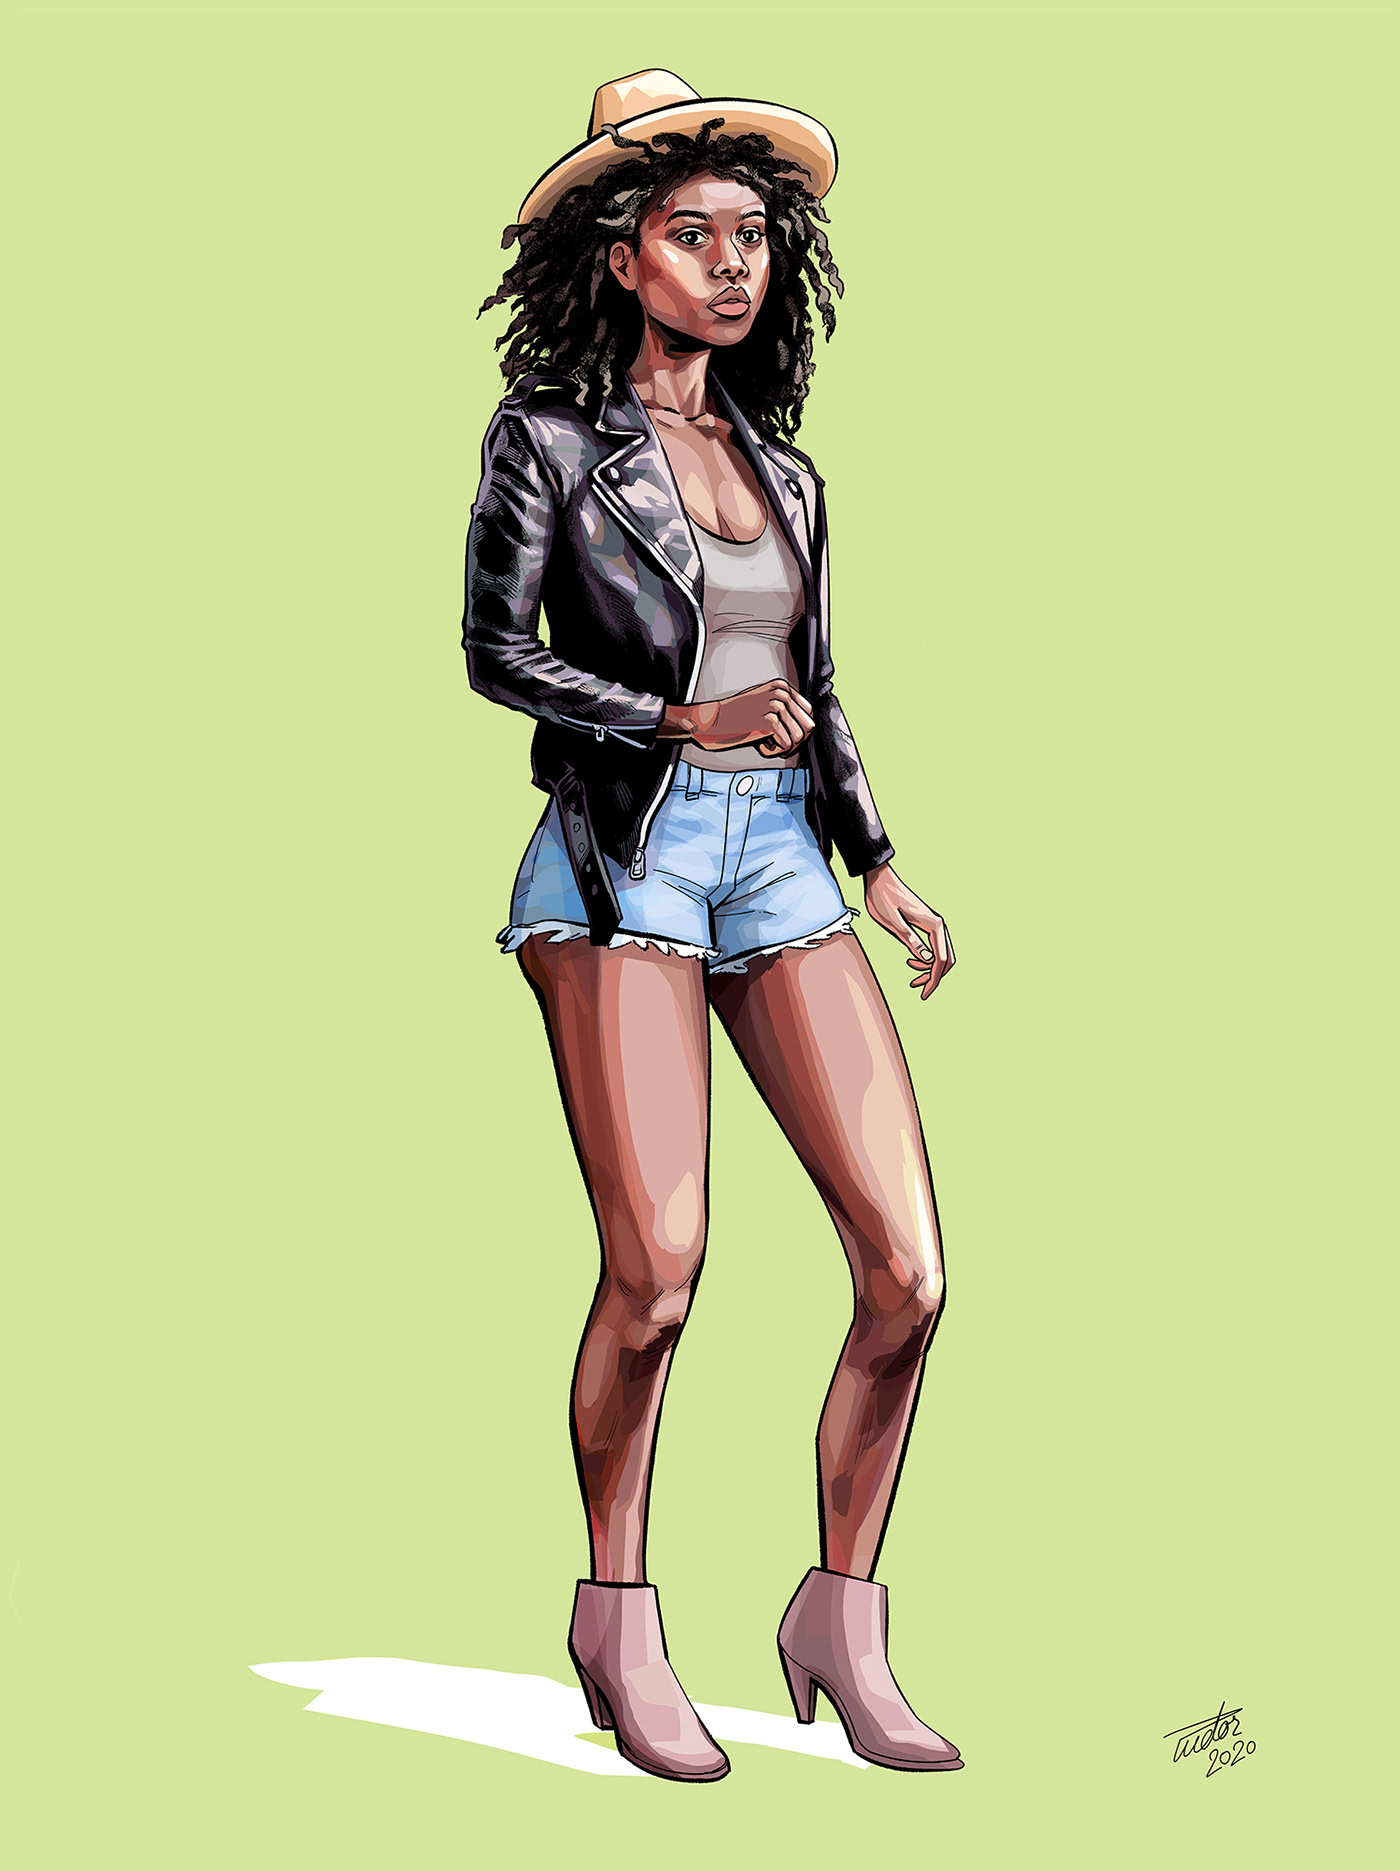 illustration of woman in fake leather jacket, tank top and short jeans wearing high heels and a hat